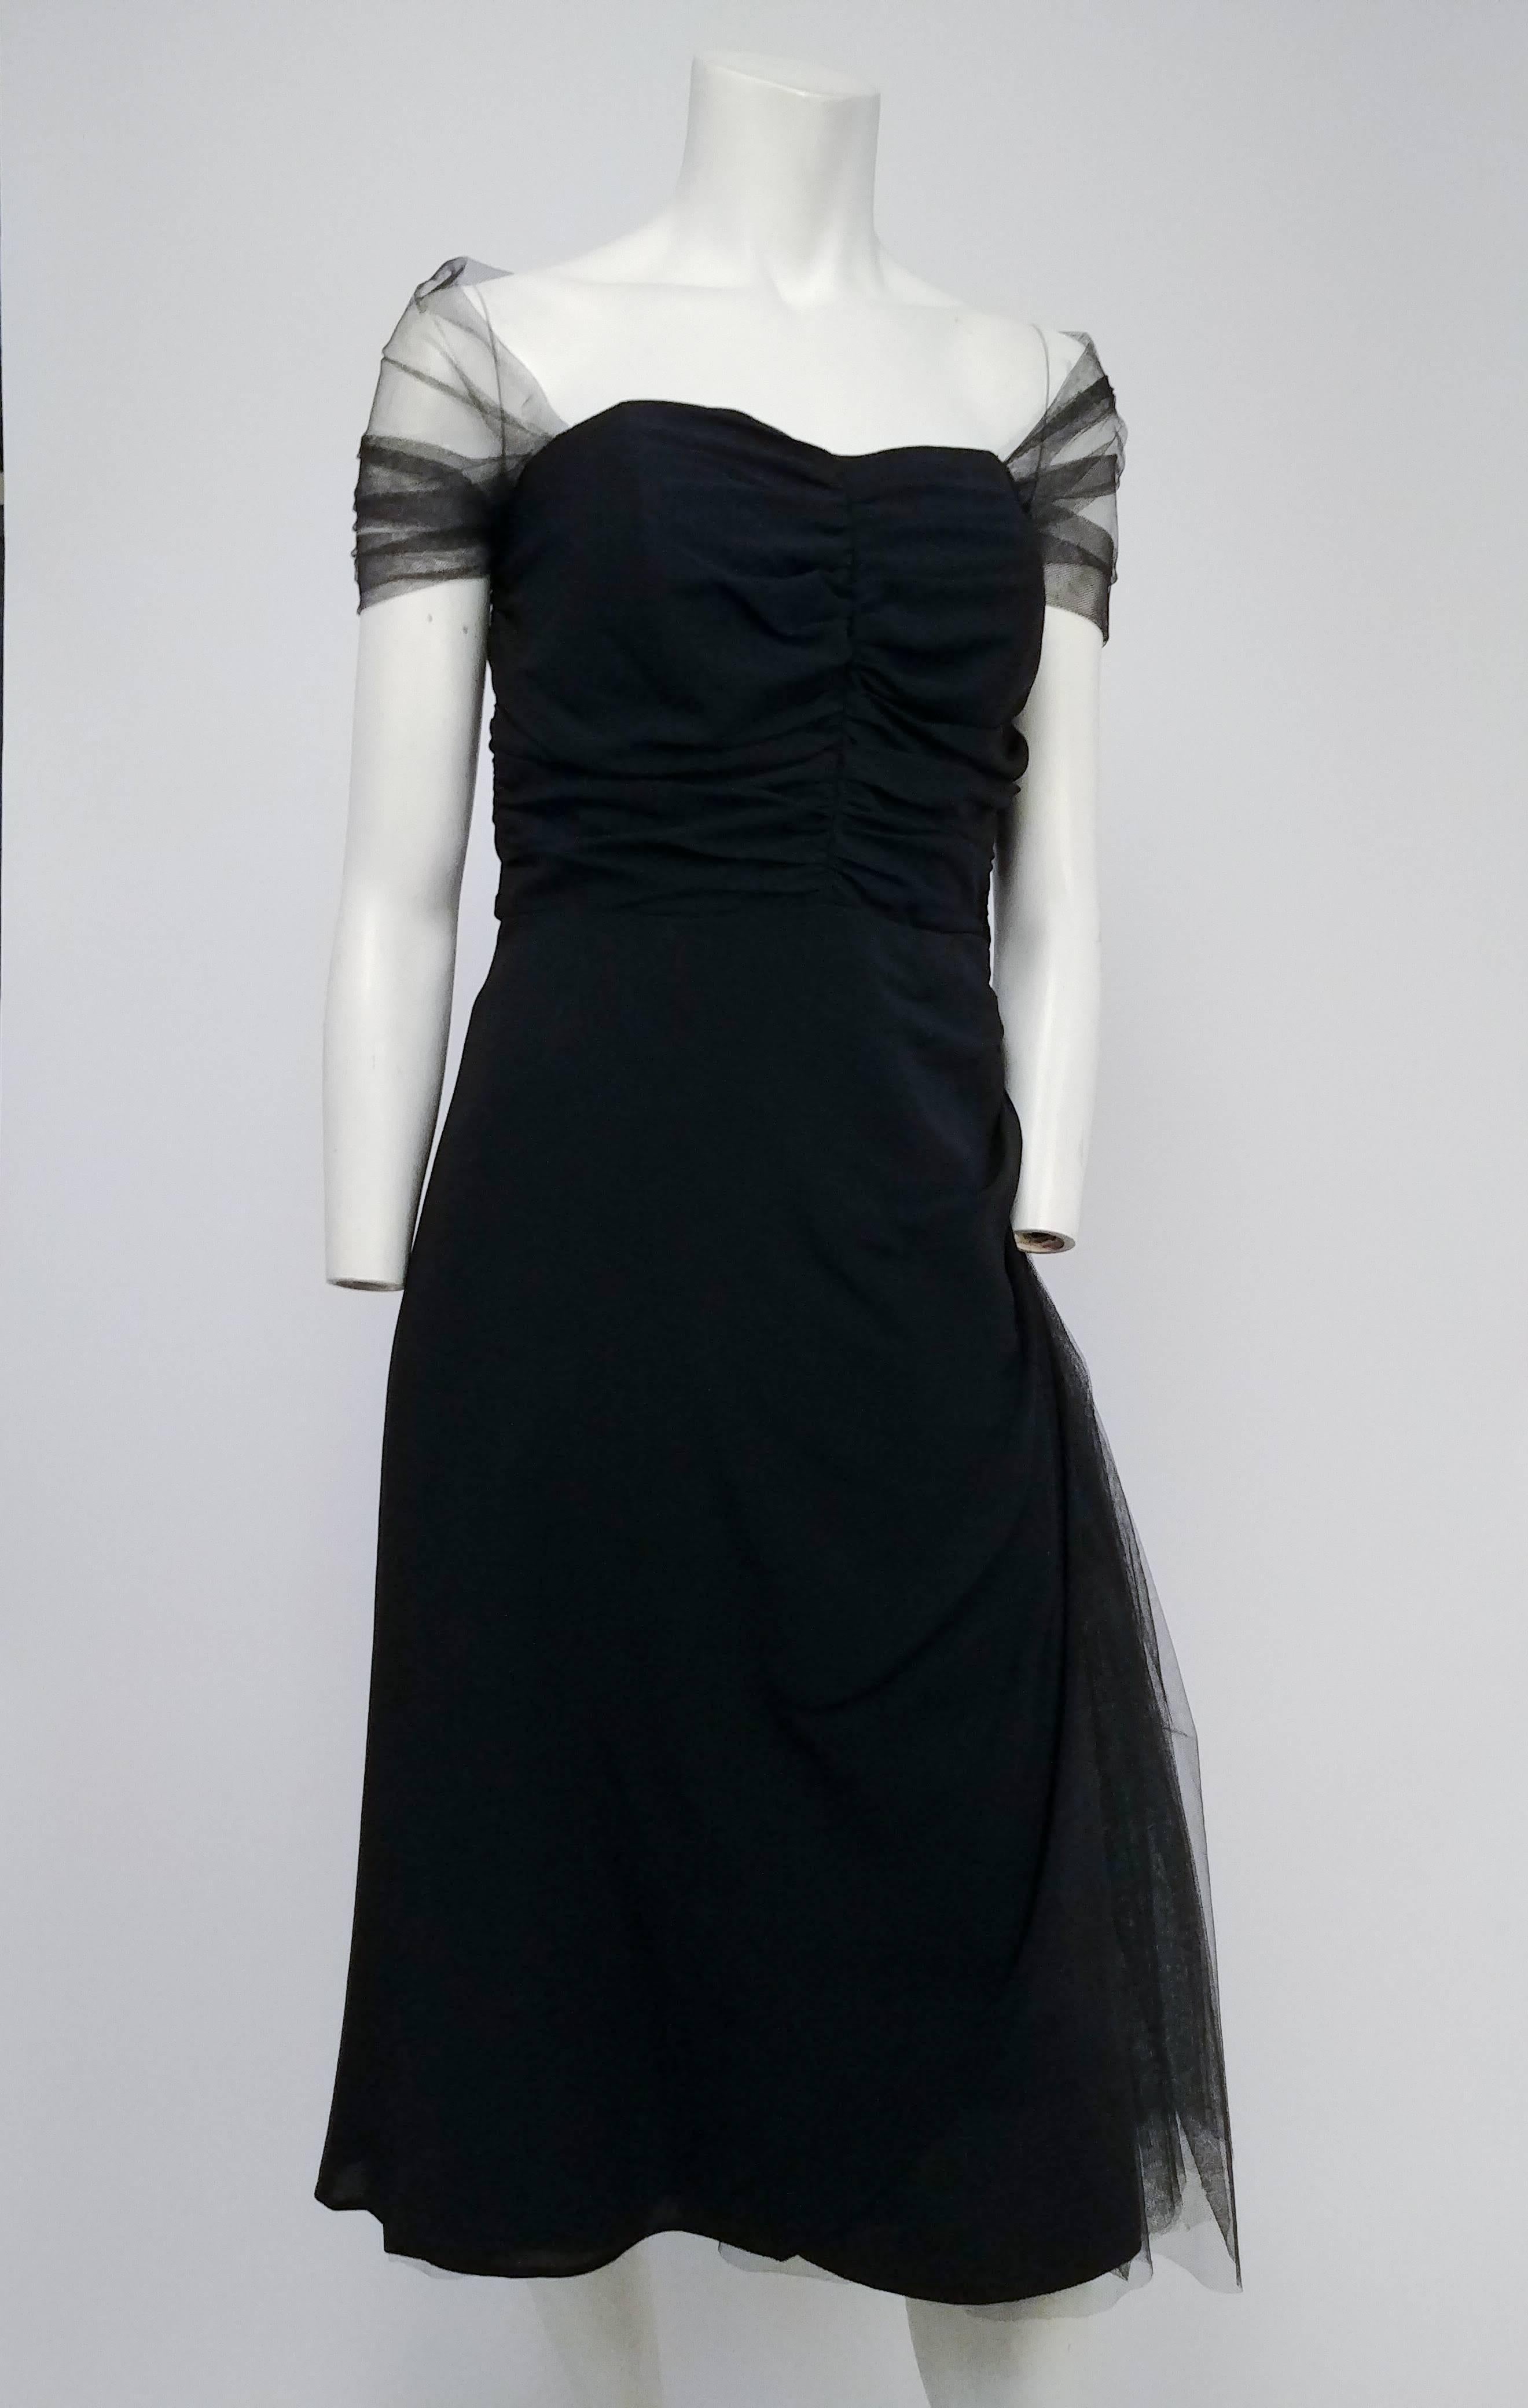 Black Cocktail Dress w/ Tulle Accents, 1950s. Gathered sweetheart neckline bodice with attached tulle shawl. Boned bodice. Asymmetric tulle detail gathered on one side of skirt. 